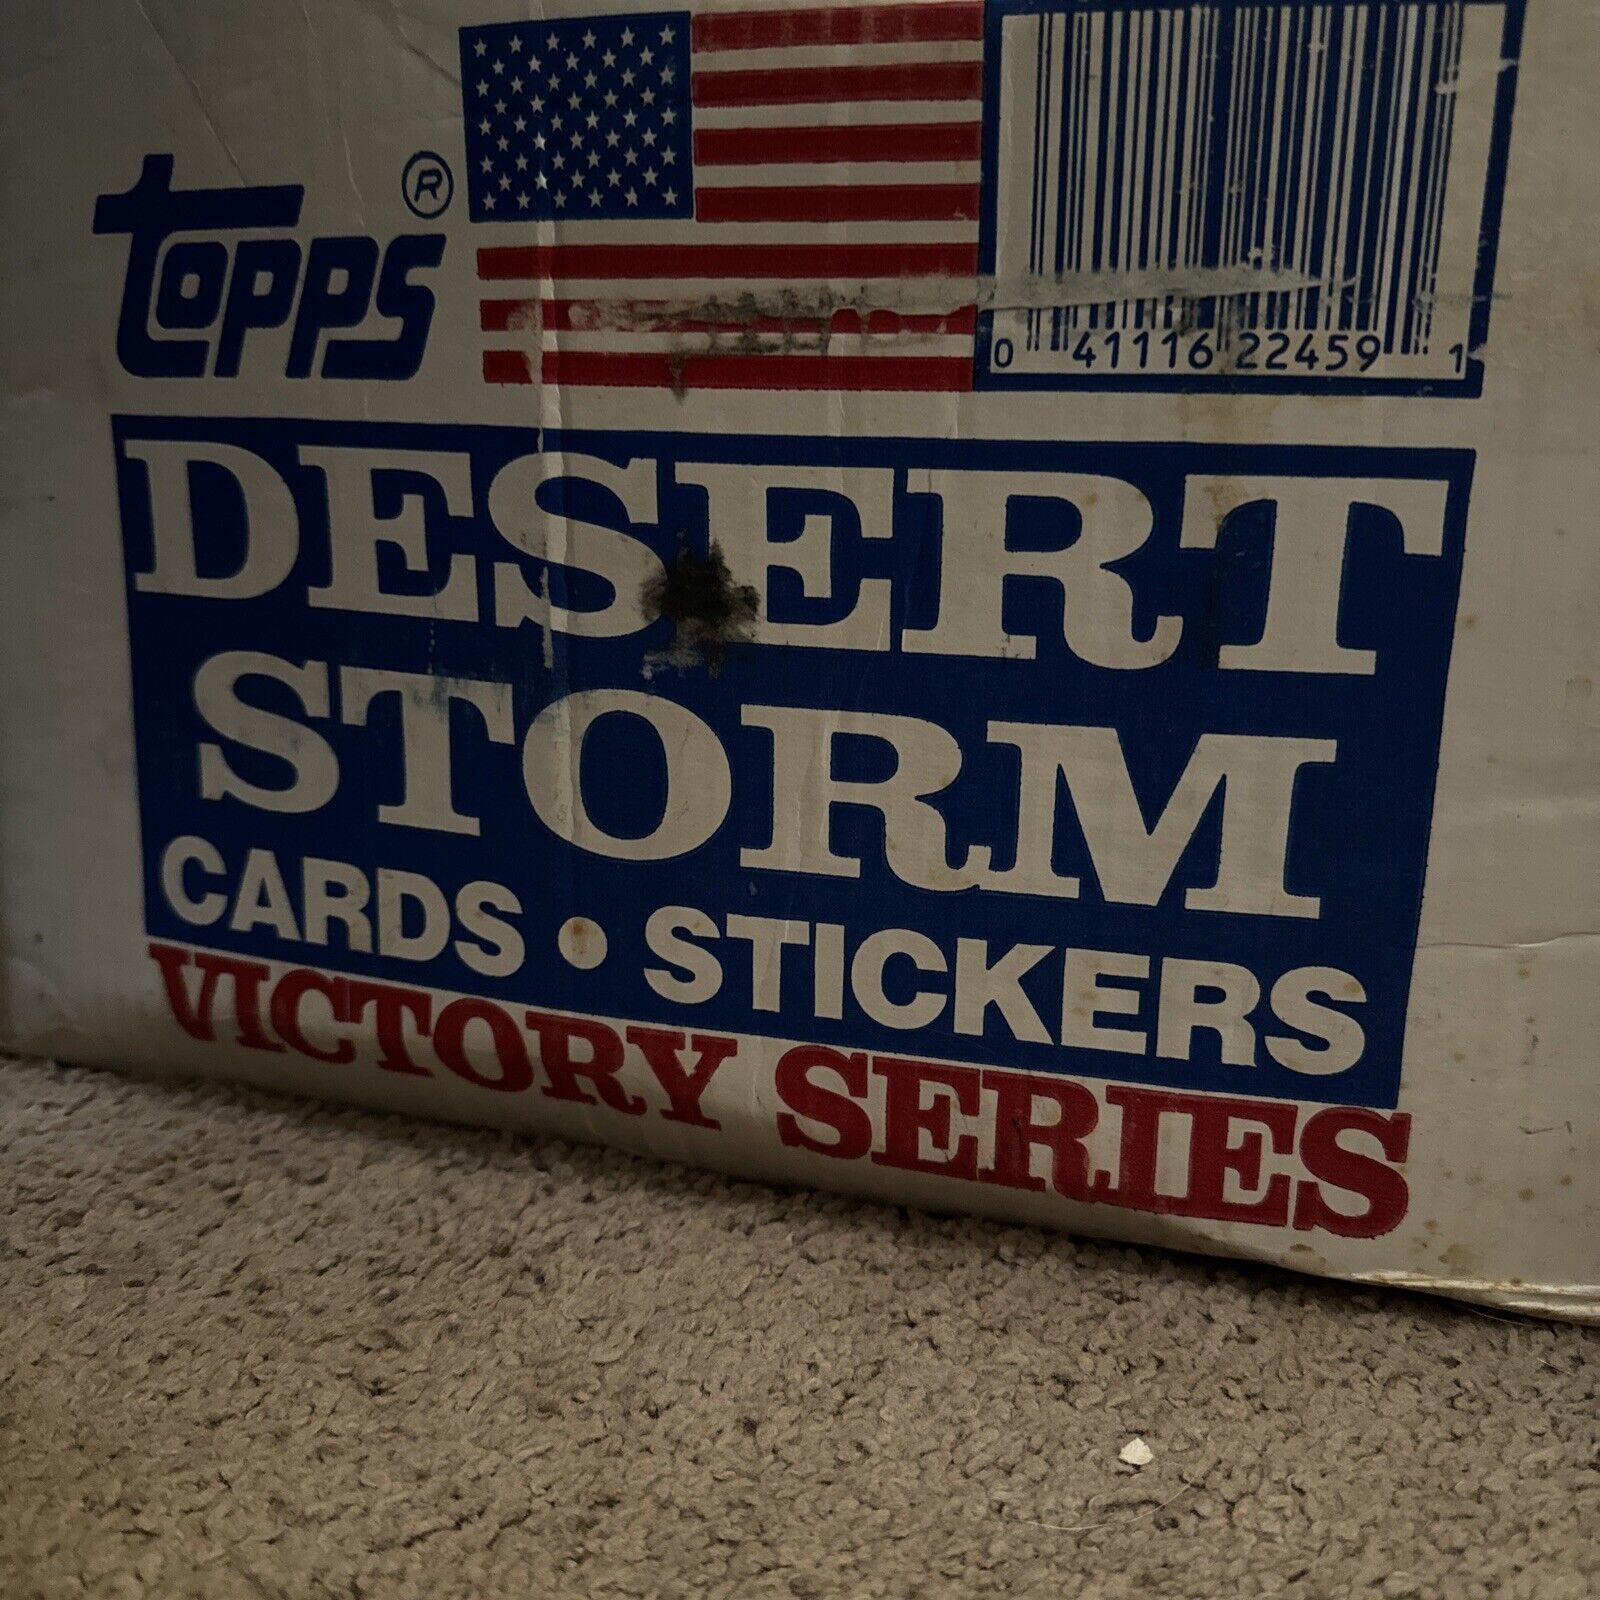 1991 Topps Desert Storm Victory Series 1 Case 24 Boxes sealed.